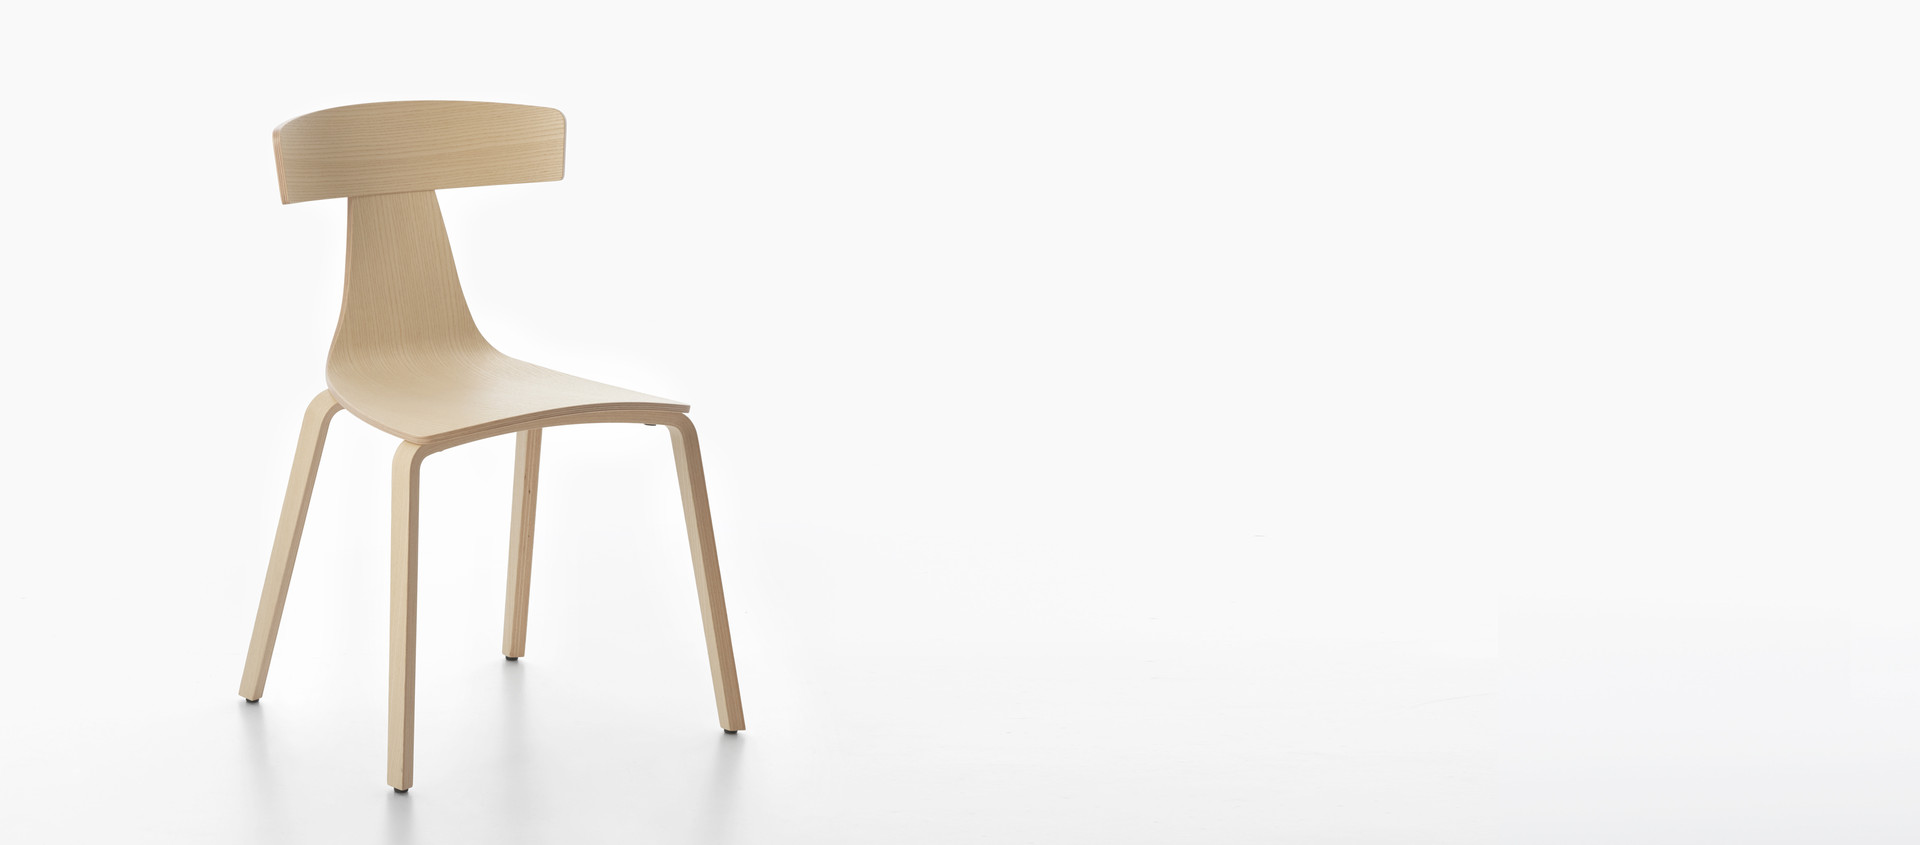 HERO - PLANK REMO wood chair